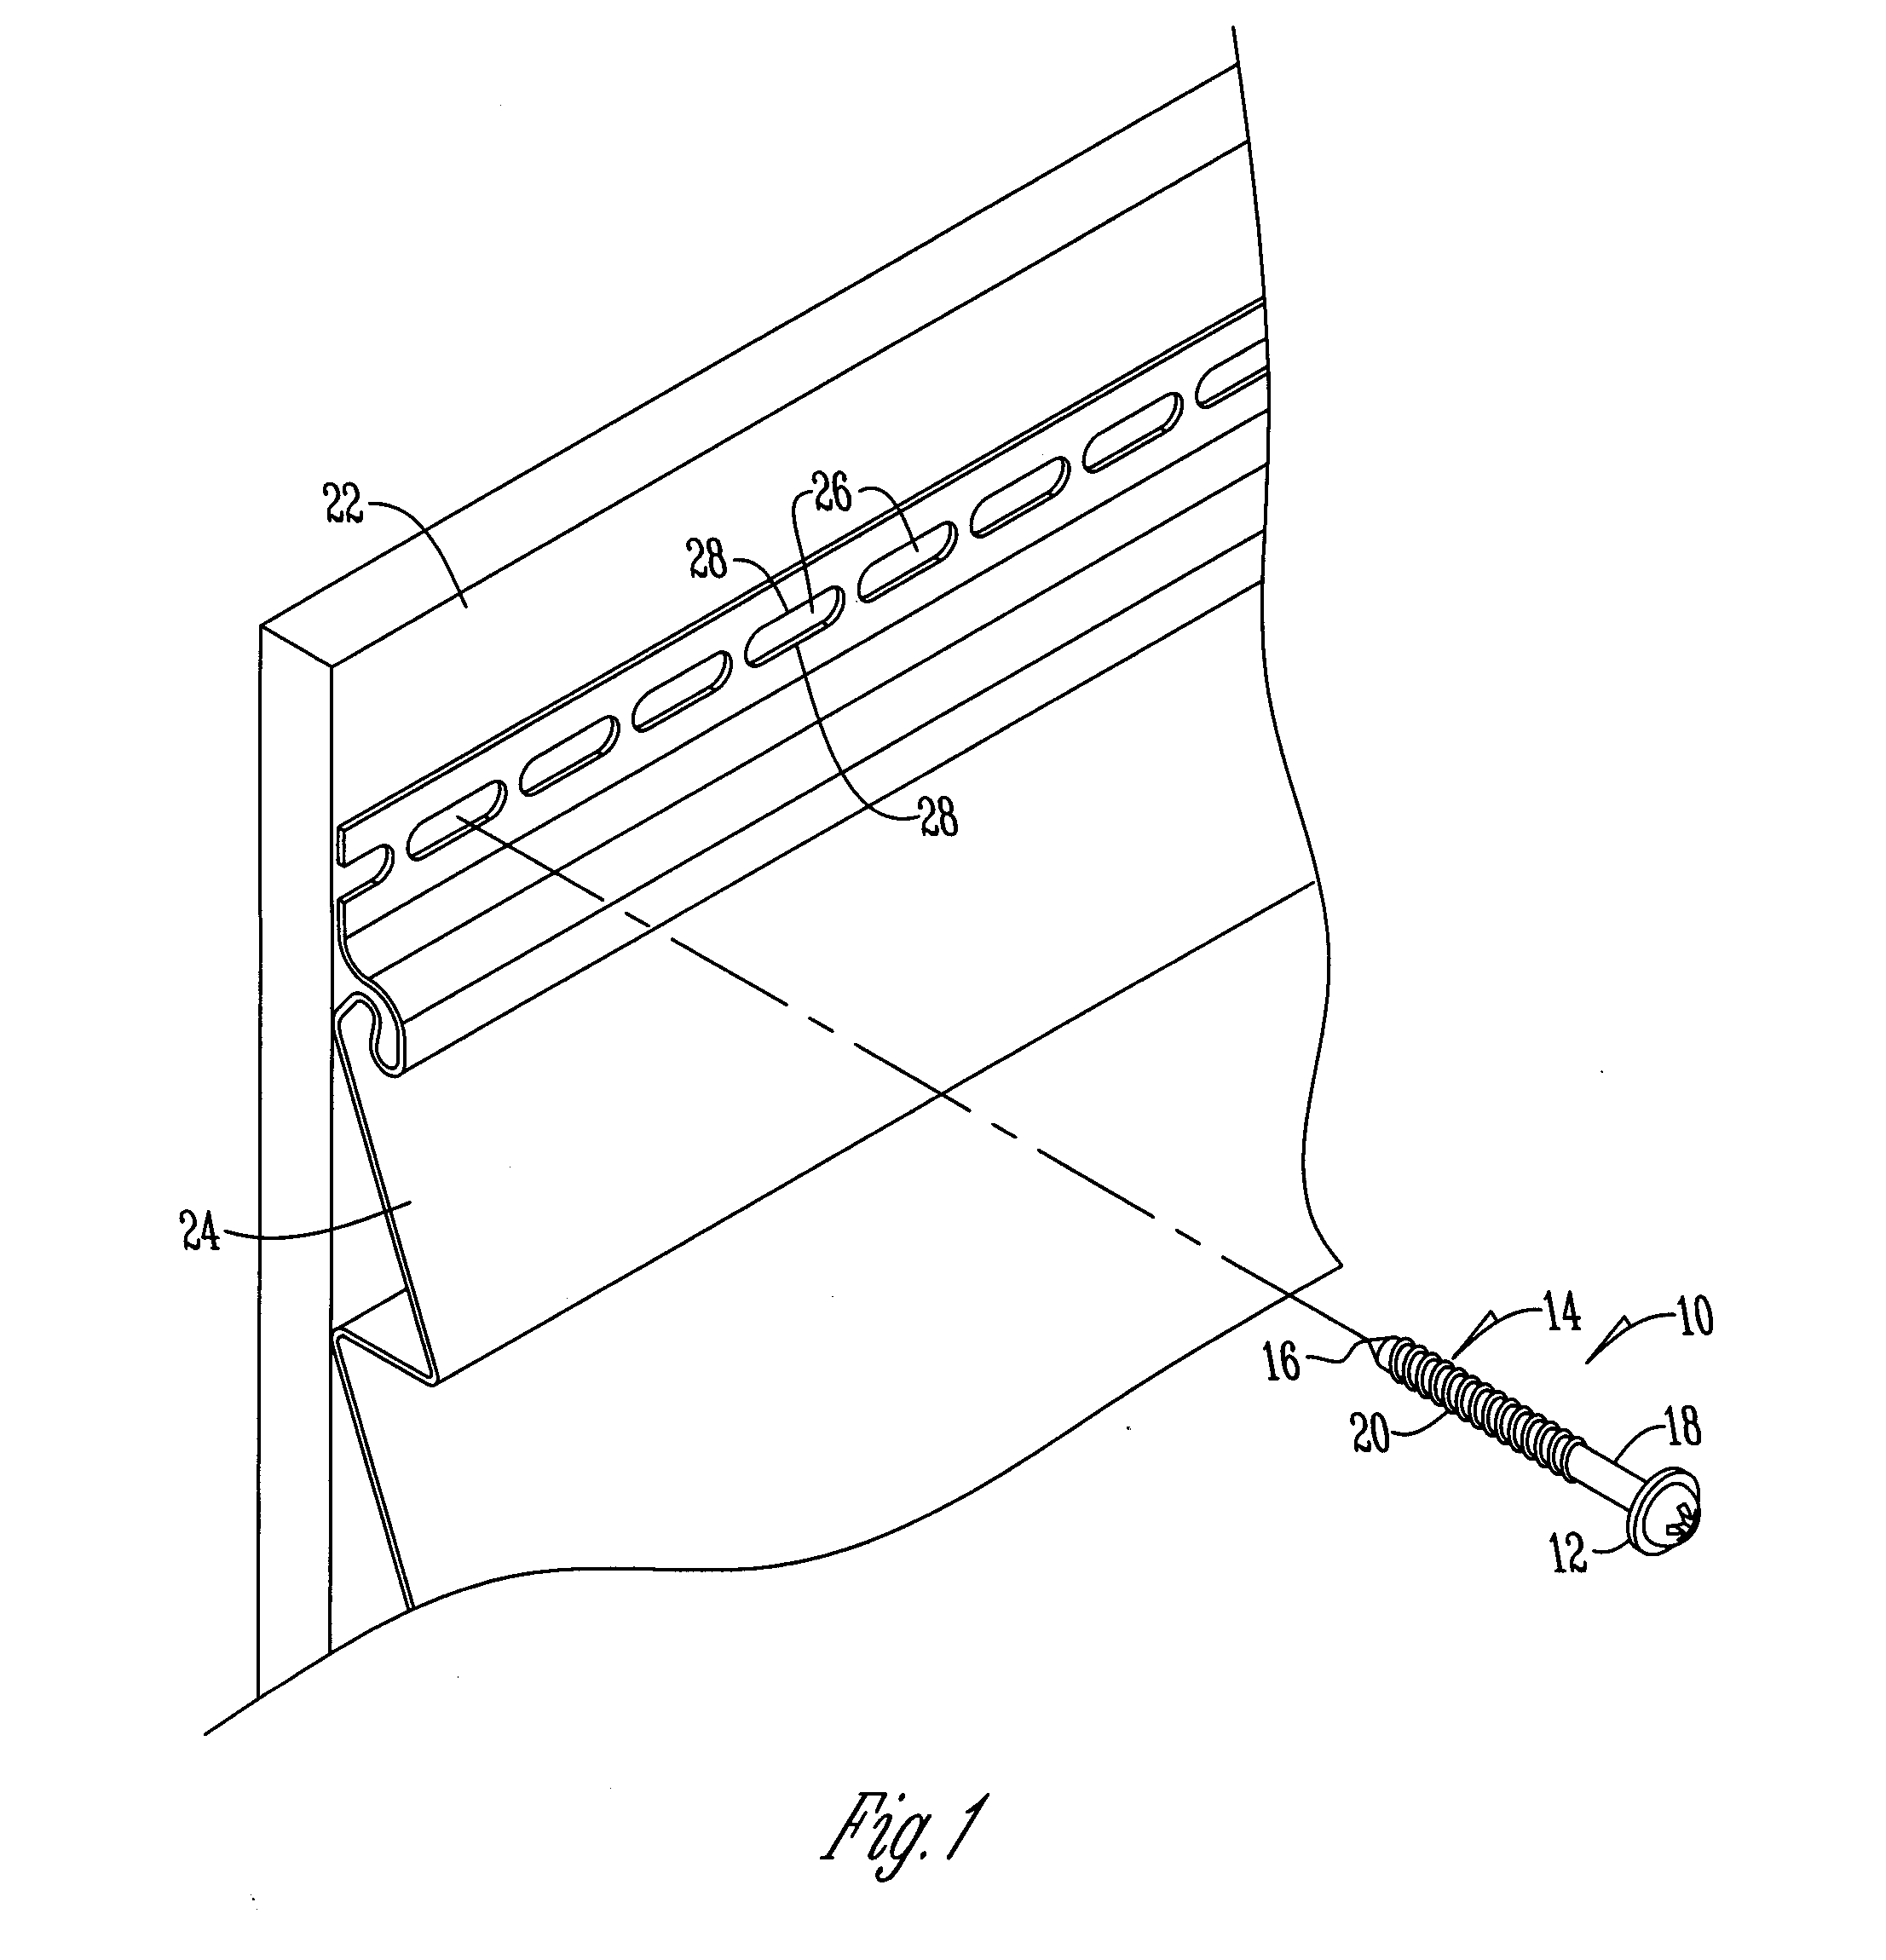 Apparatus for securing siding